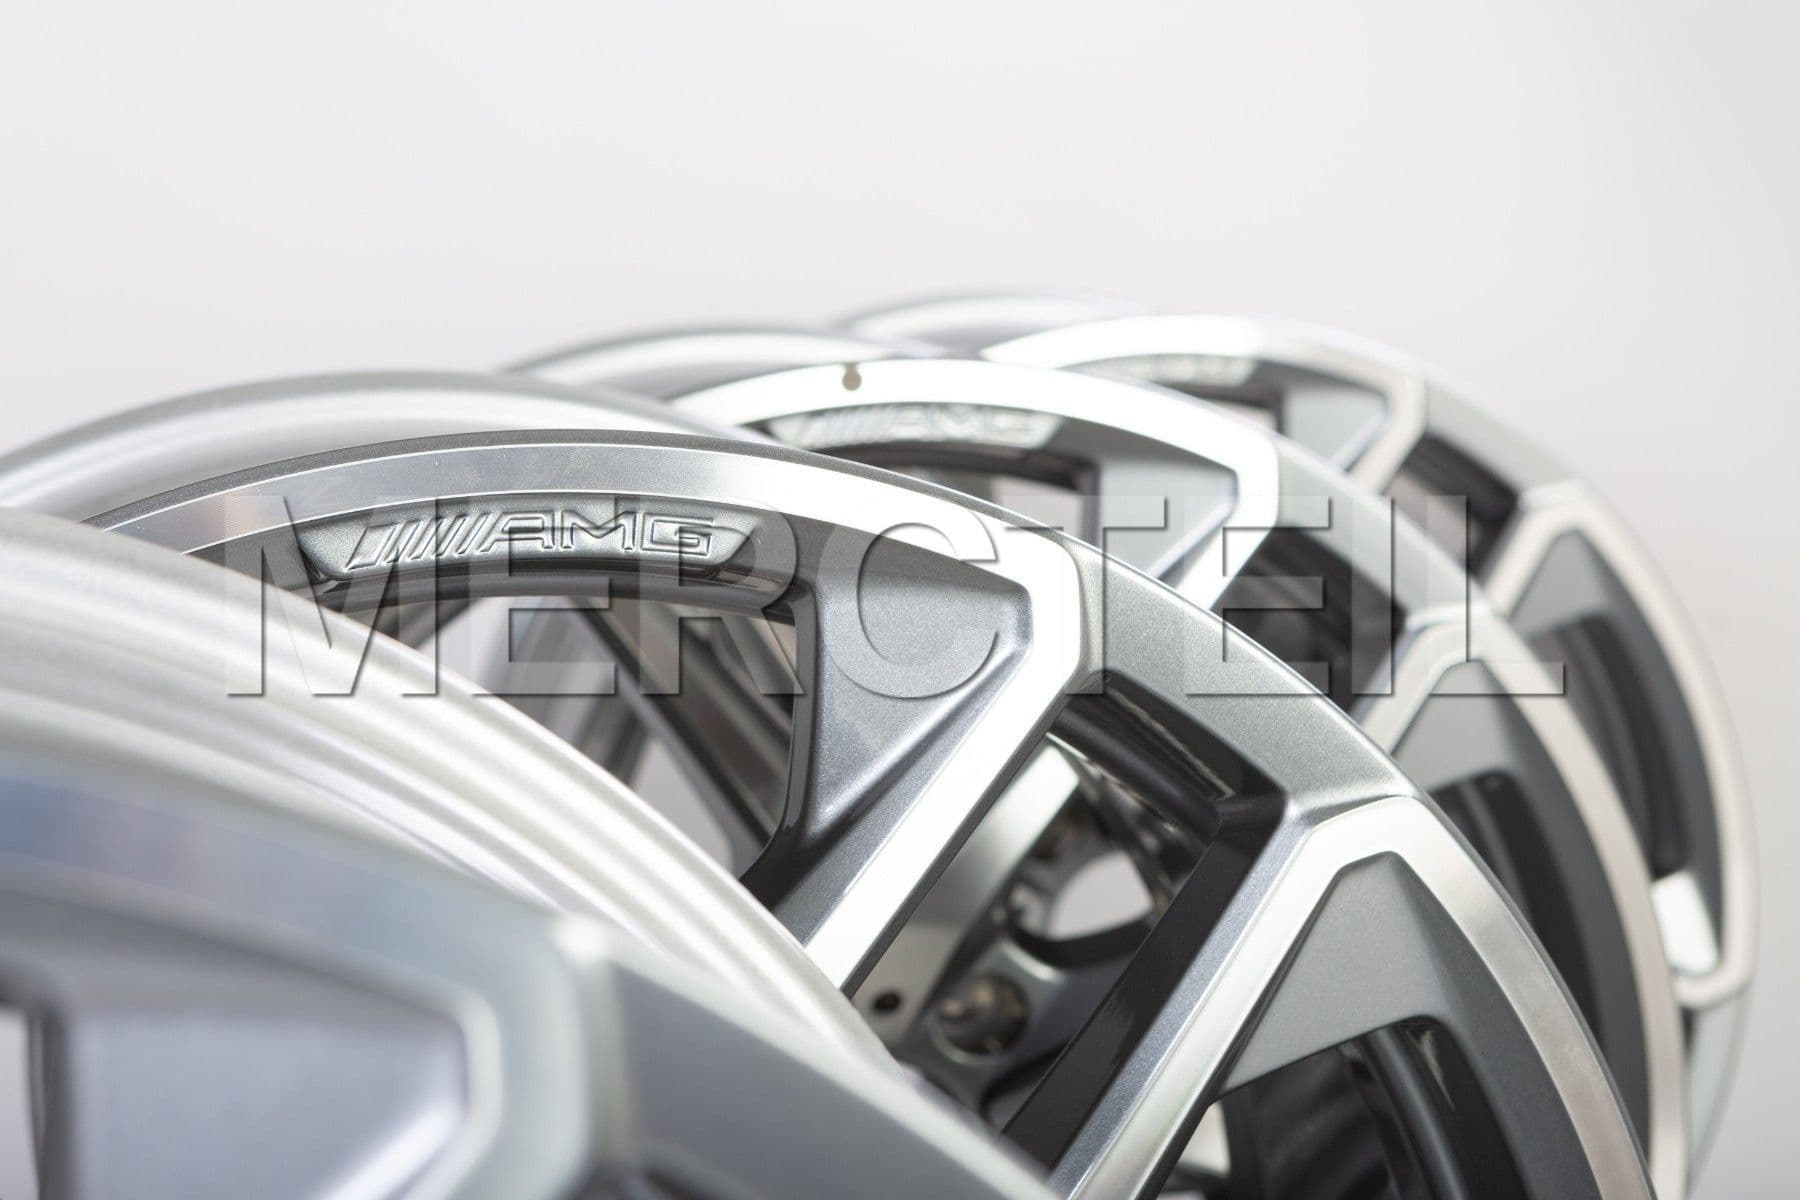 AMG G Class Alloy Wheels Himalaya Gray 21 Inch W463A Genuine Mercedes Benz (part number: A46340119007X21)